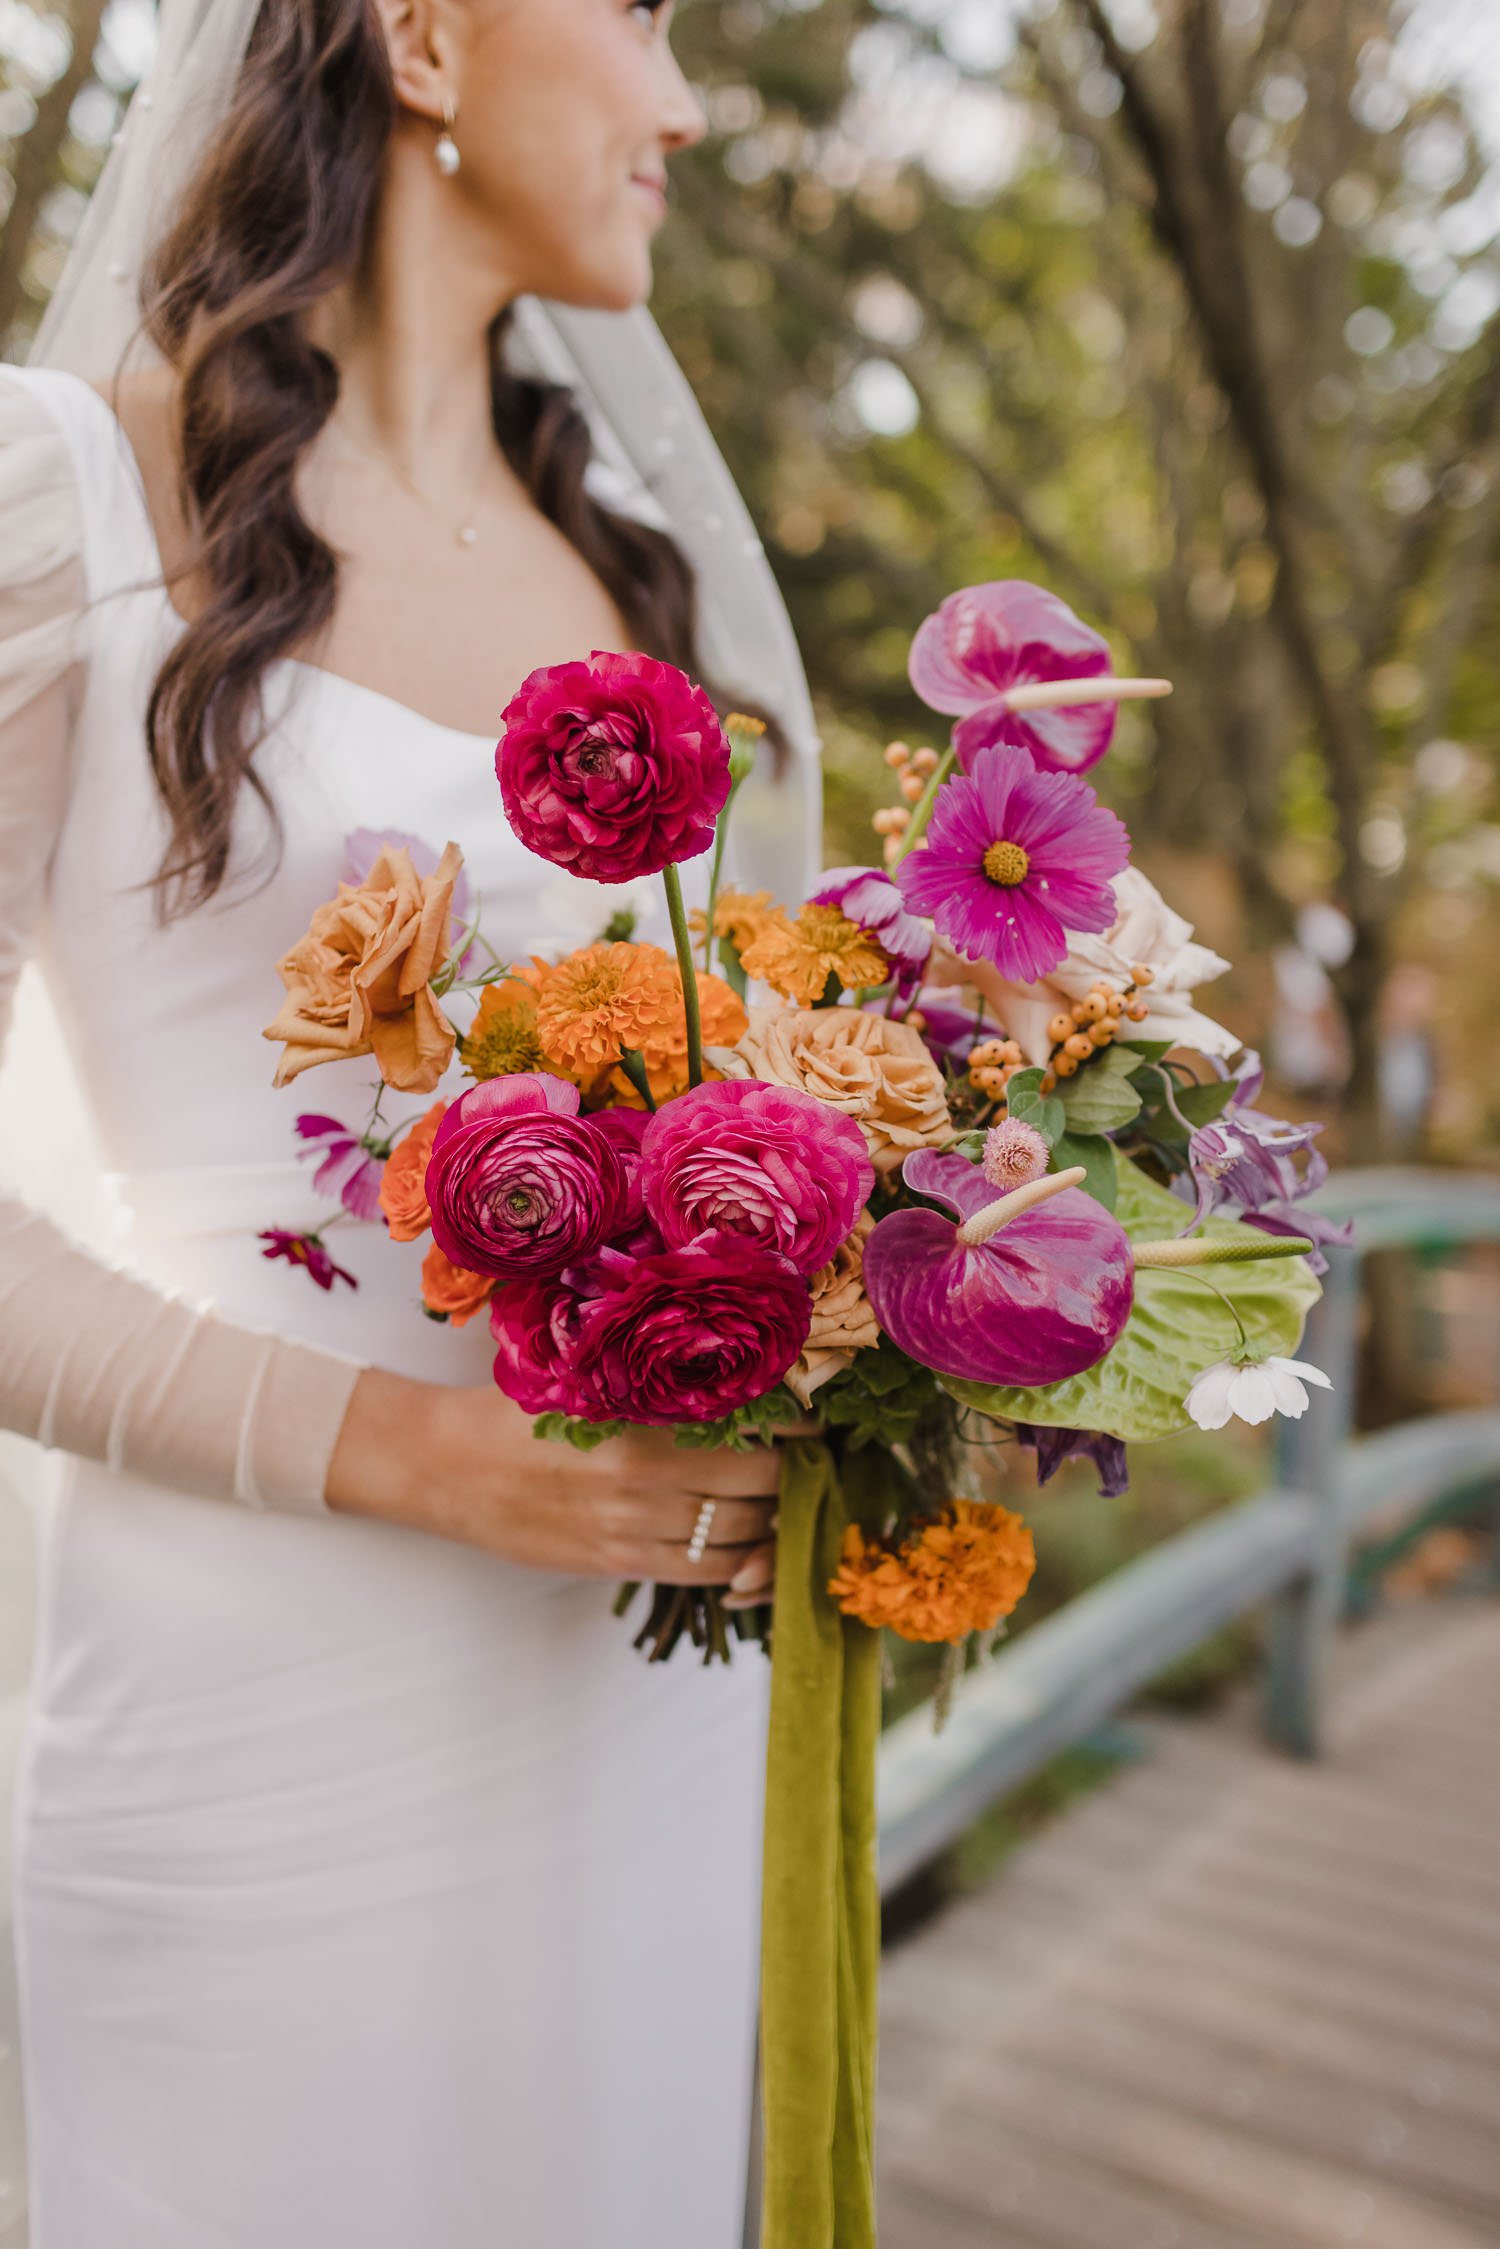 Colorful wedding bouquet with pink ranunculus, orange marigolds, green anthurium lily, and chartreuse velvet ribbon